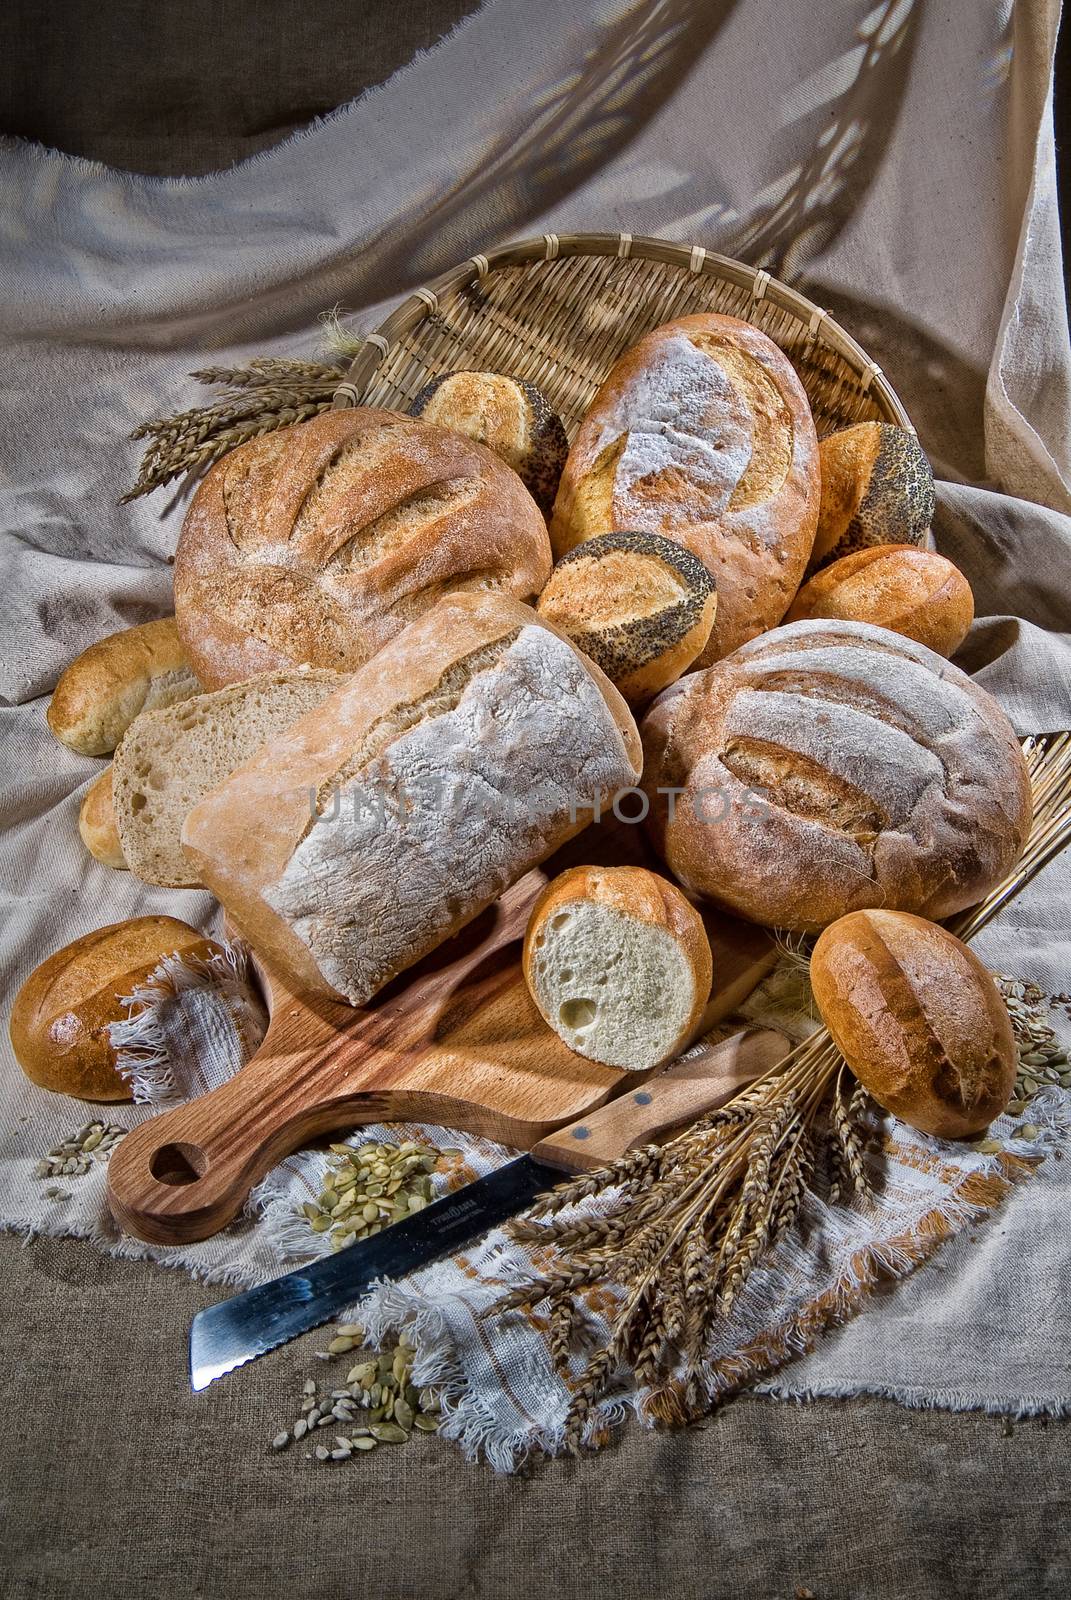 Different kinds of bread and pastry